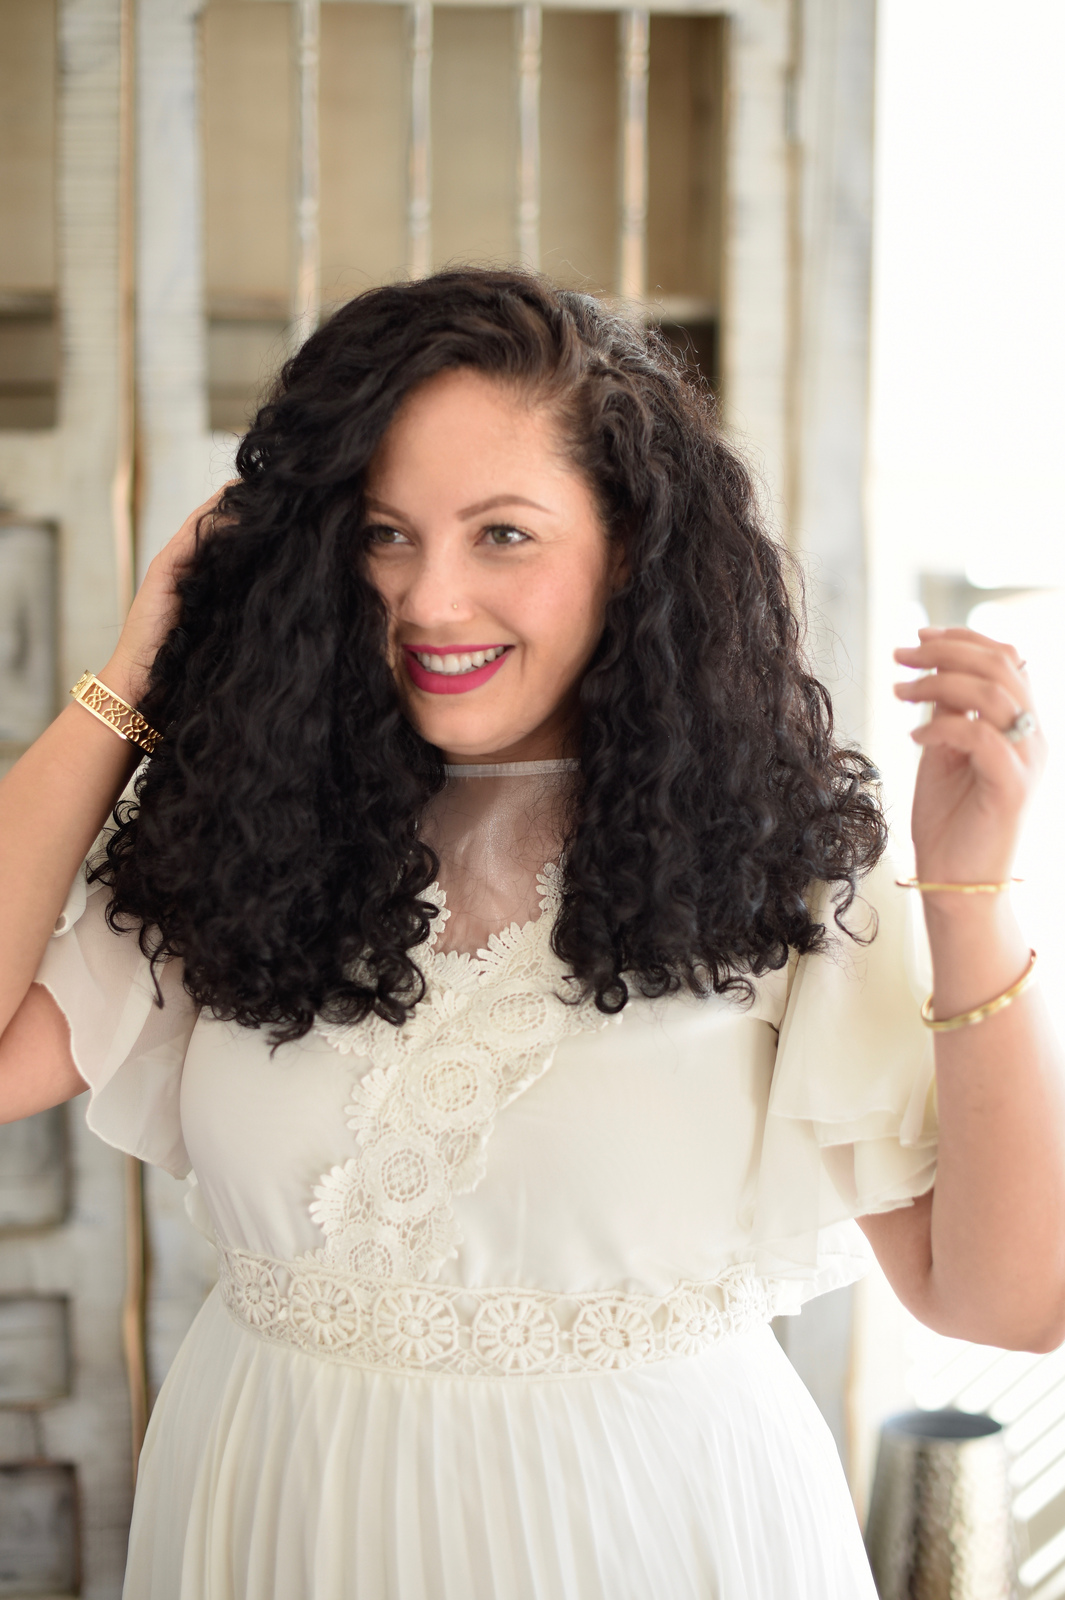 Girl With Curves blogger Tanesha Awasthi shares 7 tips for healthy hair.